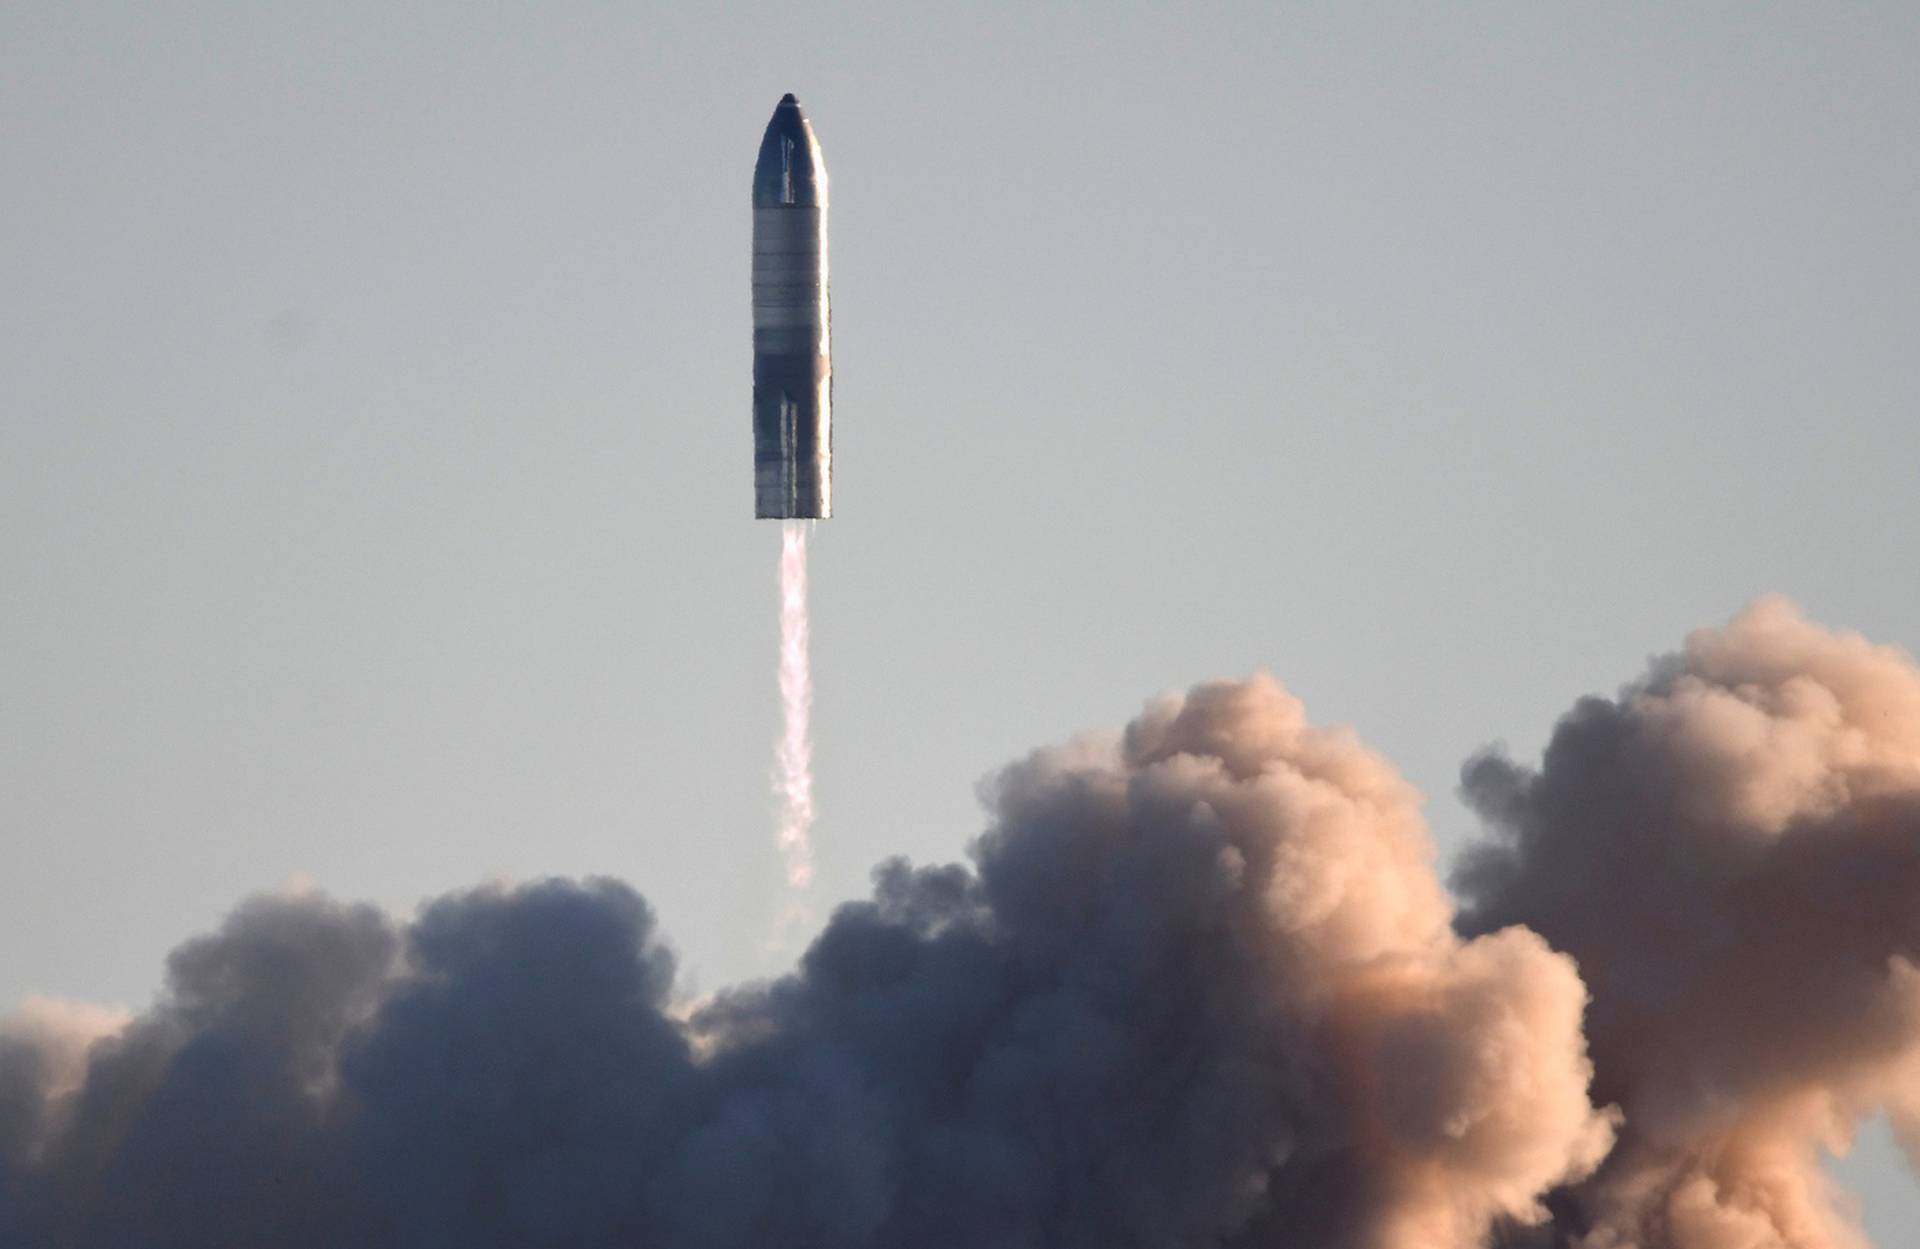 SpaceX launches its first super heavy-lift Starship SN8 rocket during a test from their facility in Boca Chica,Texas